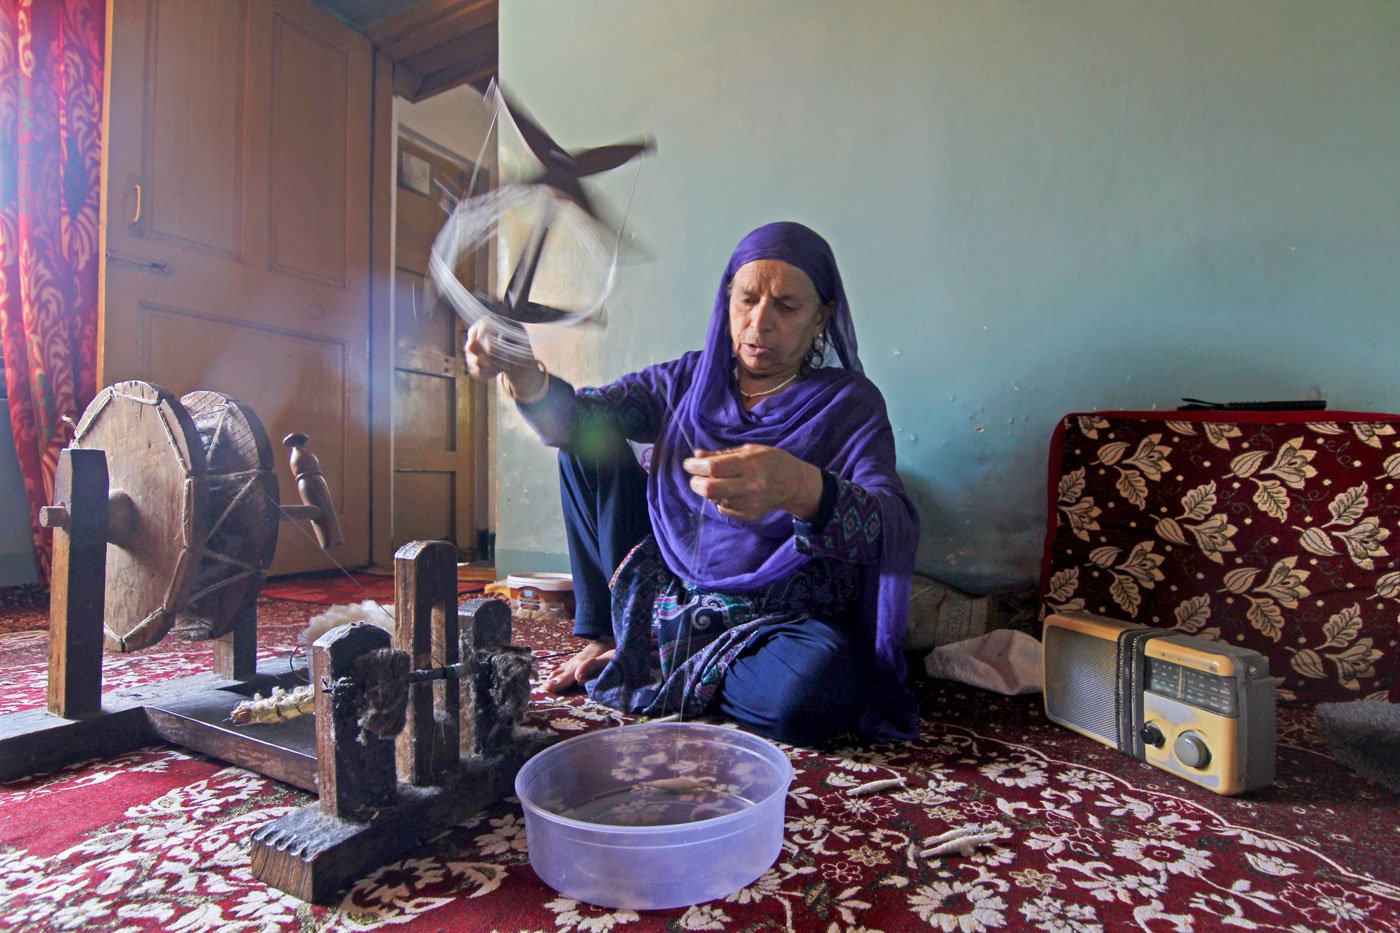 Fahmeeda's mother-in-law, Khatija combines two threads together to make it more durable